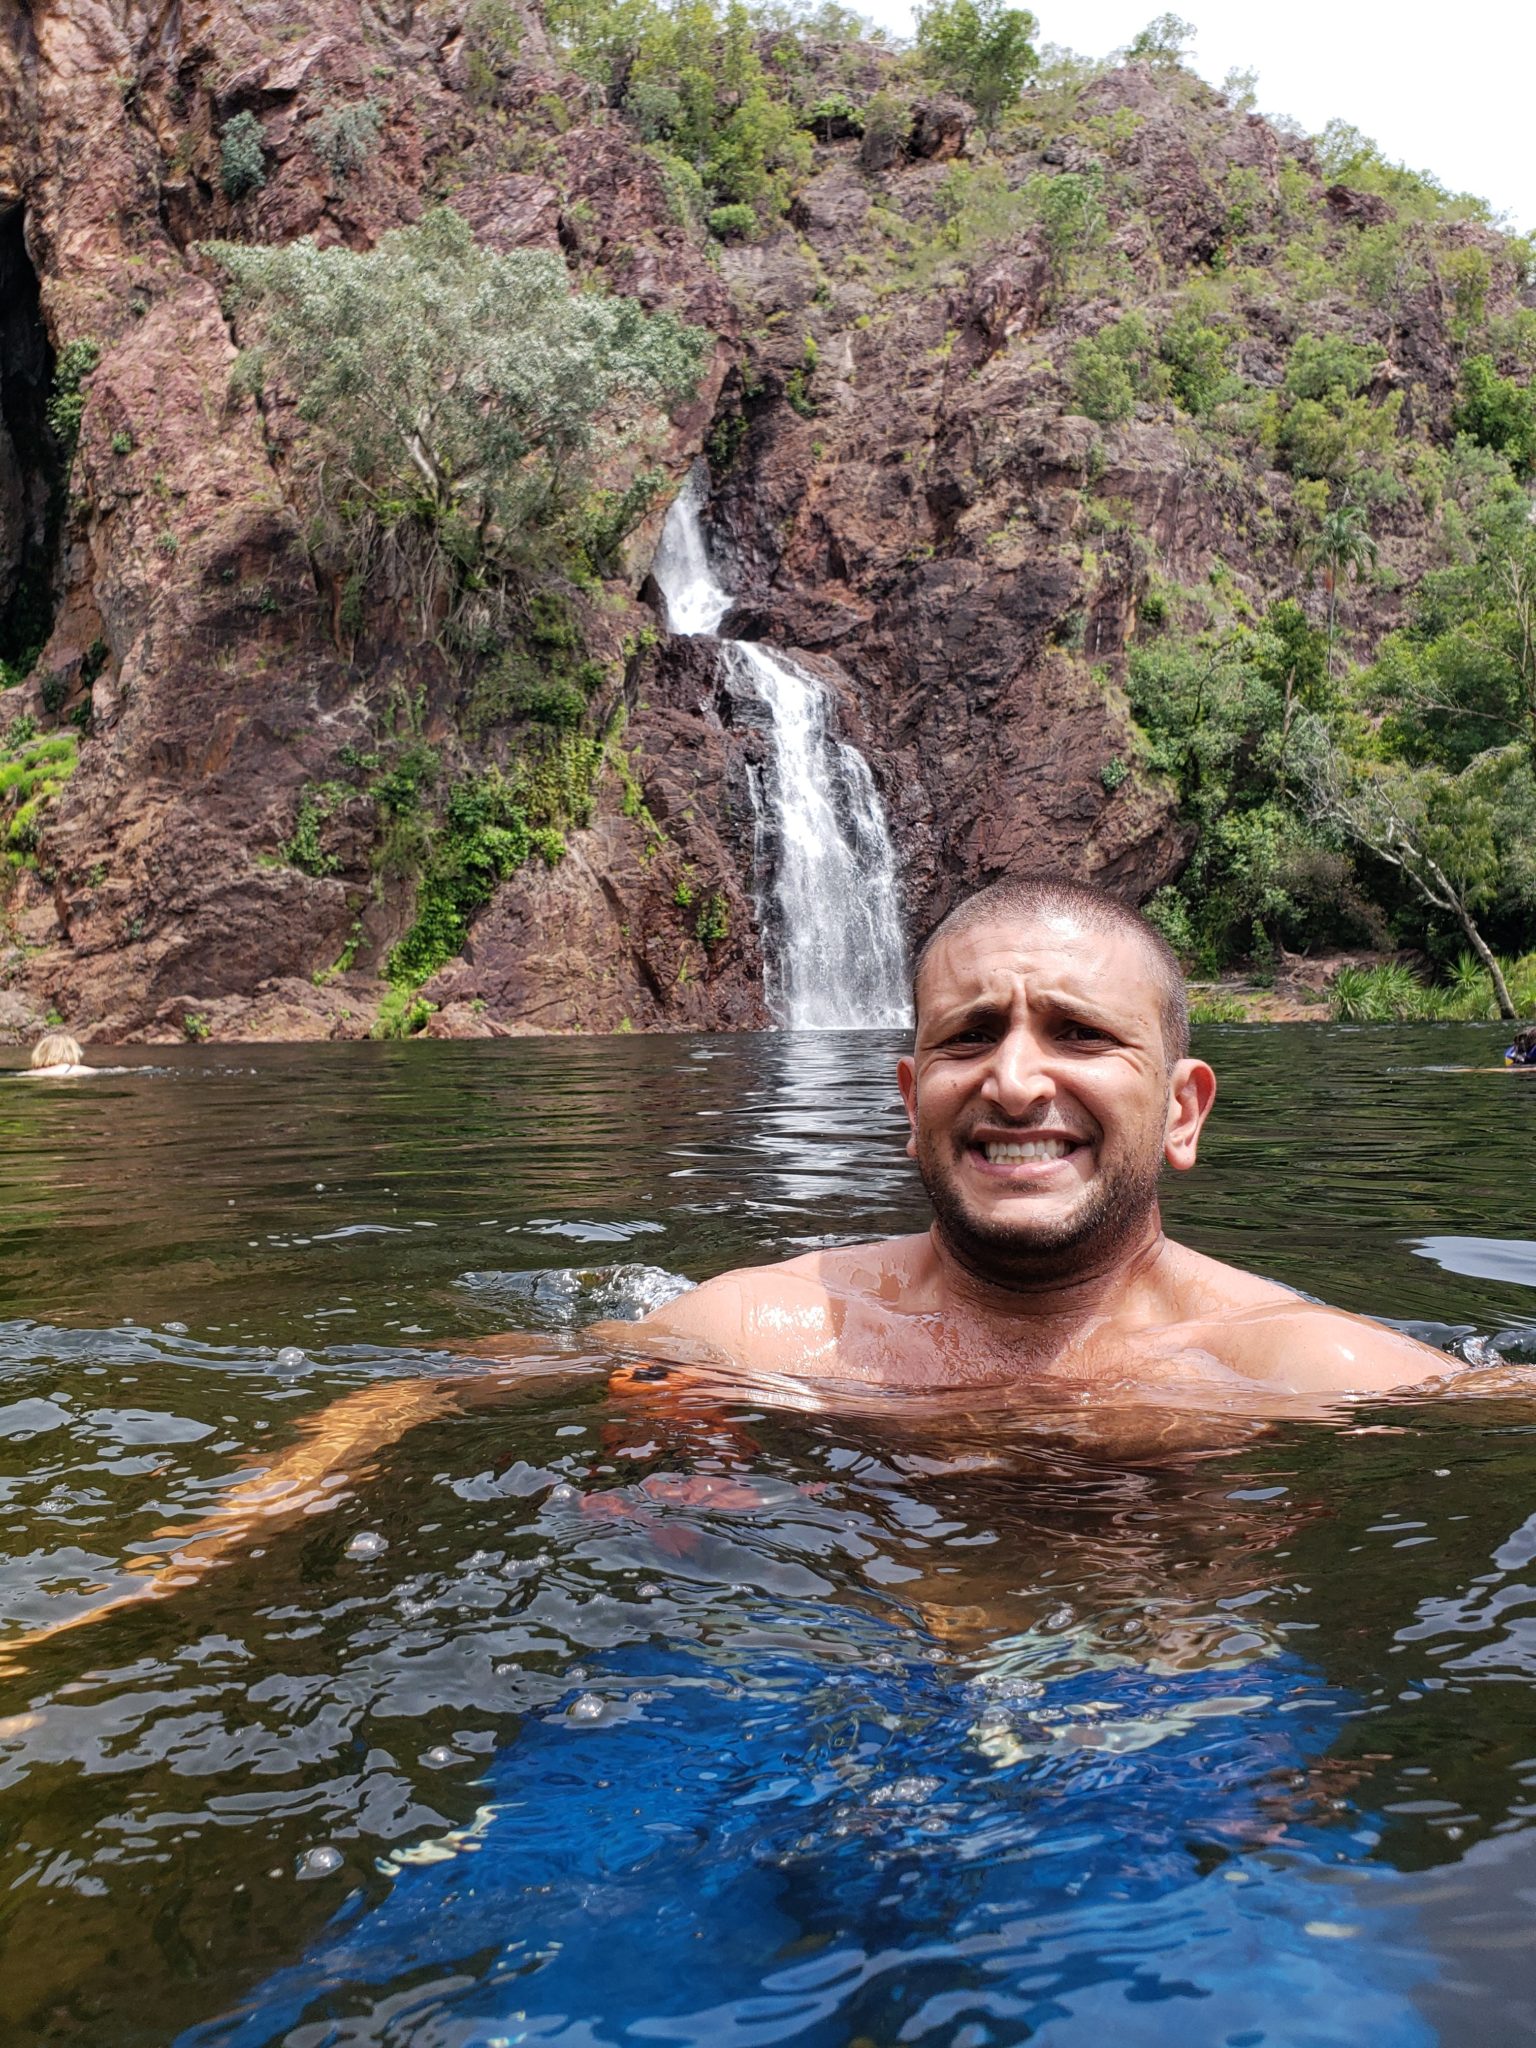 a man in a body of water with a waterfall in the background